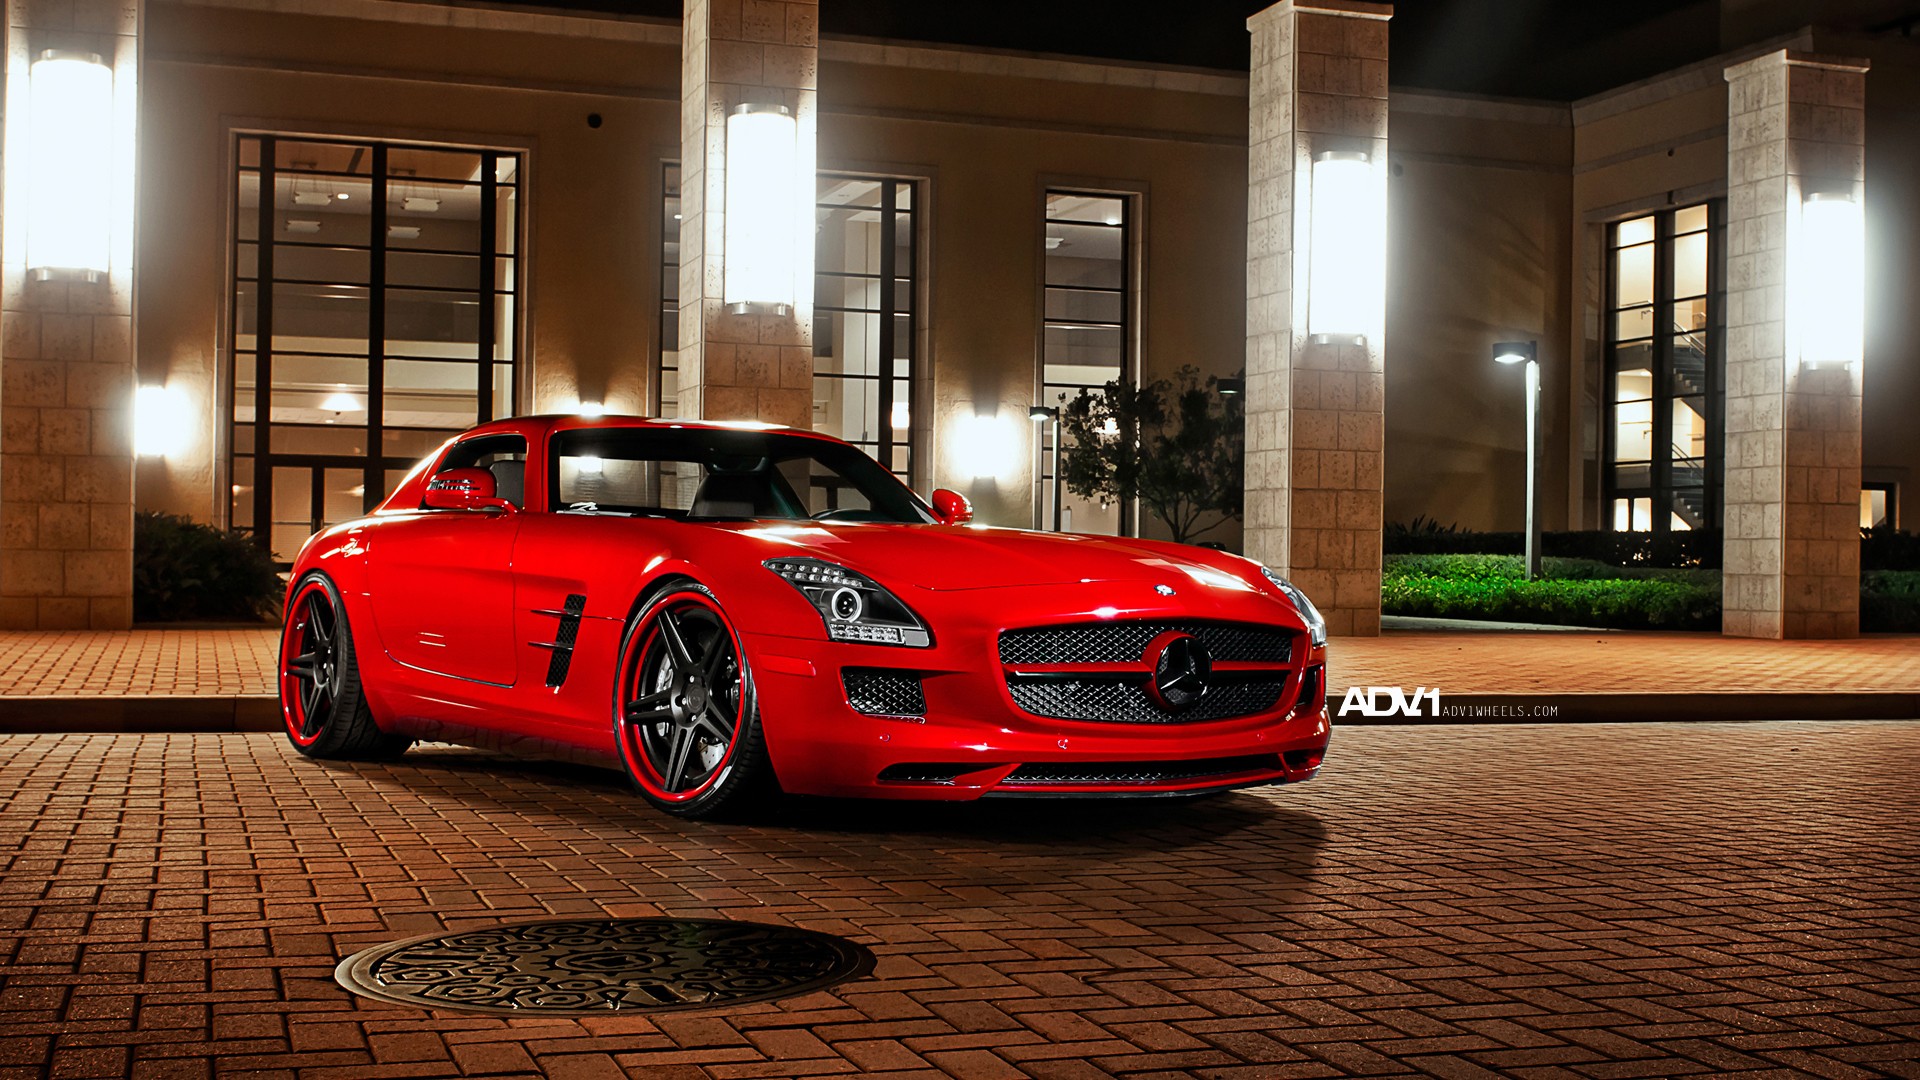 Mercedes Benz Wallpapers, Pictures, Images